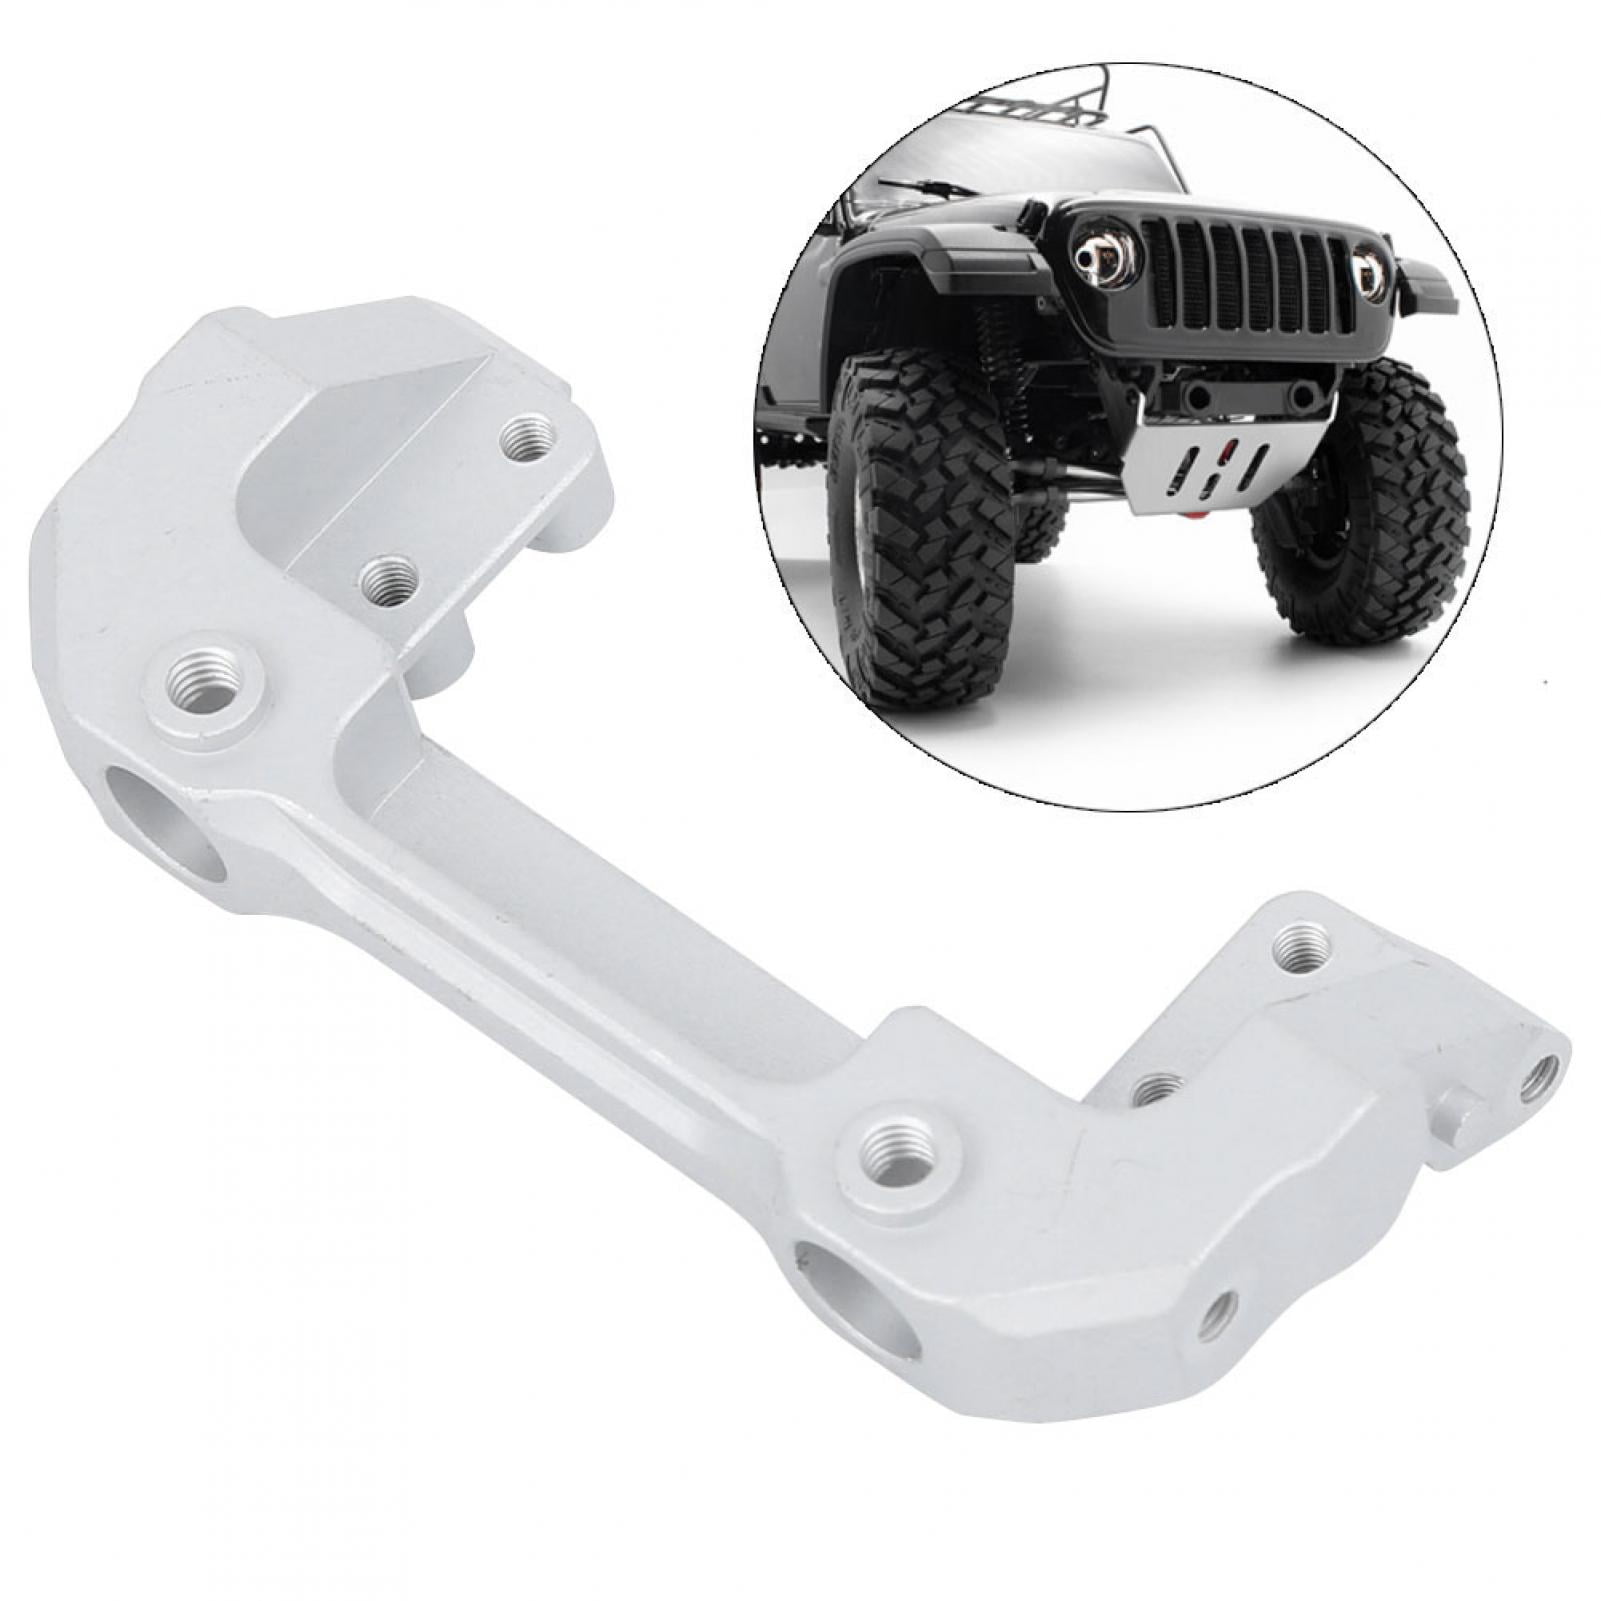 Details about   RC Bumper fit for Axial   SCX10 1/10 Crawler Buggy Car Replacement Parts